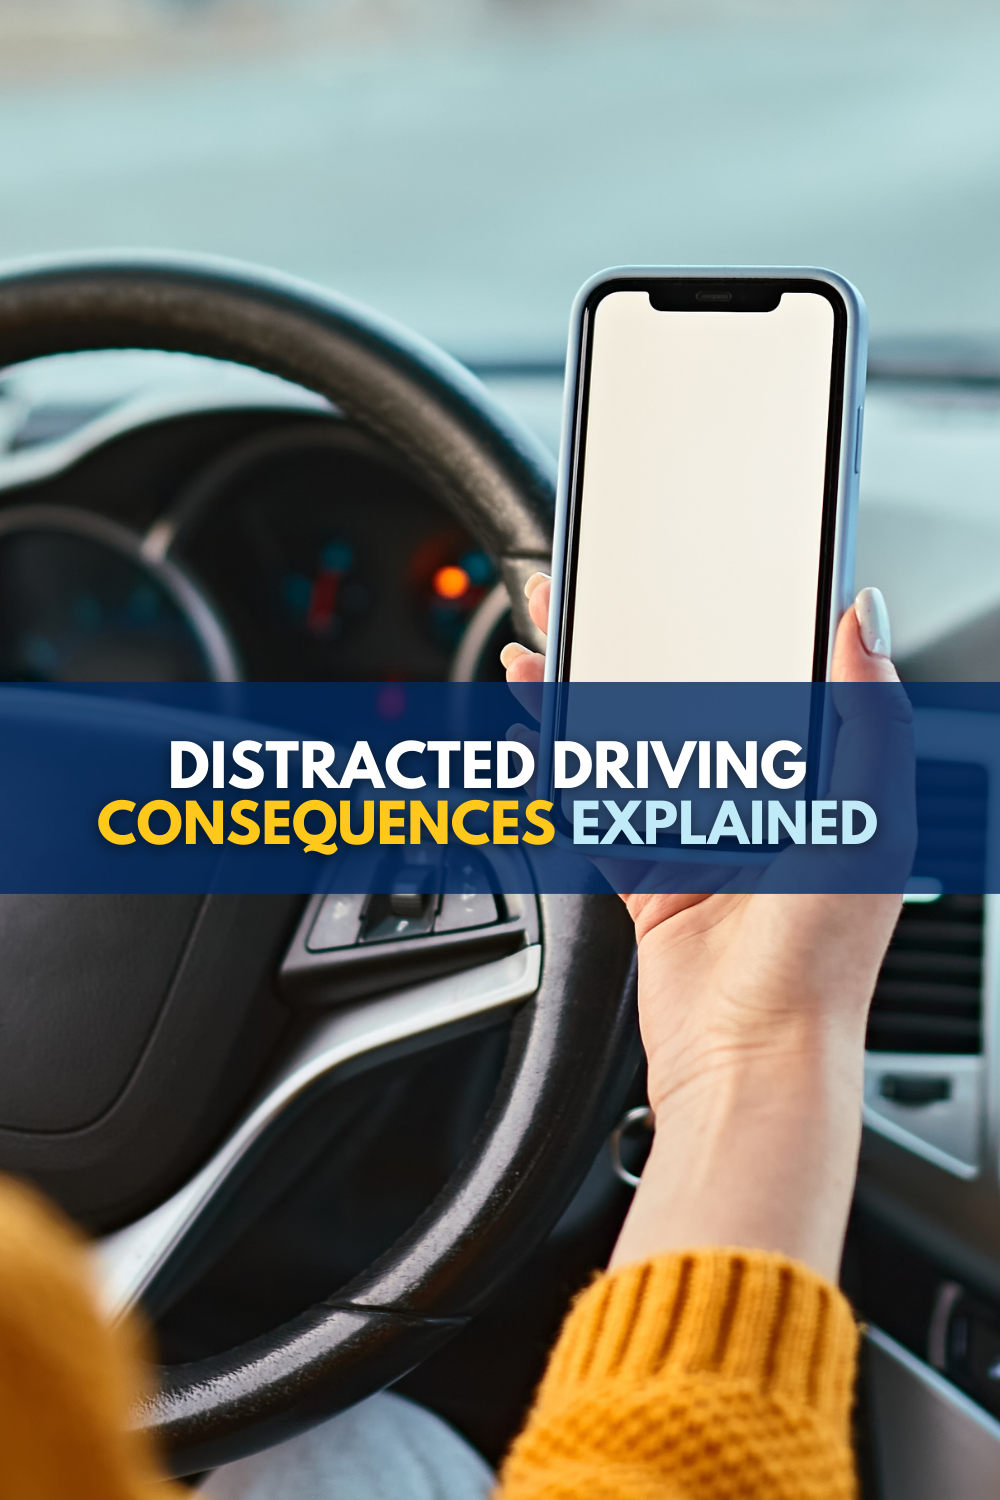 Consequences Of Distracted Driving In Michigan Explained